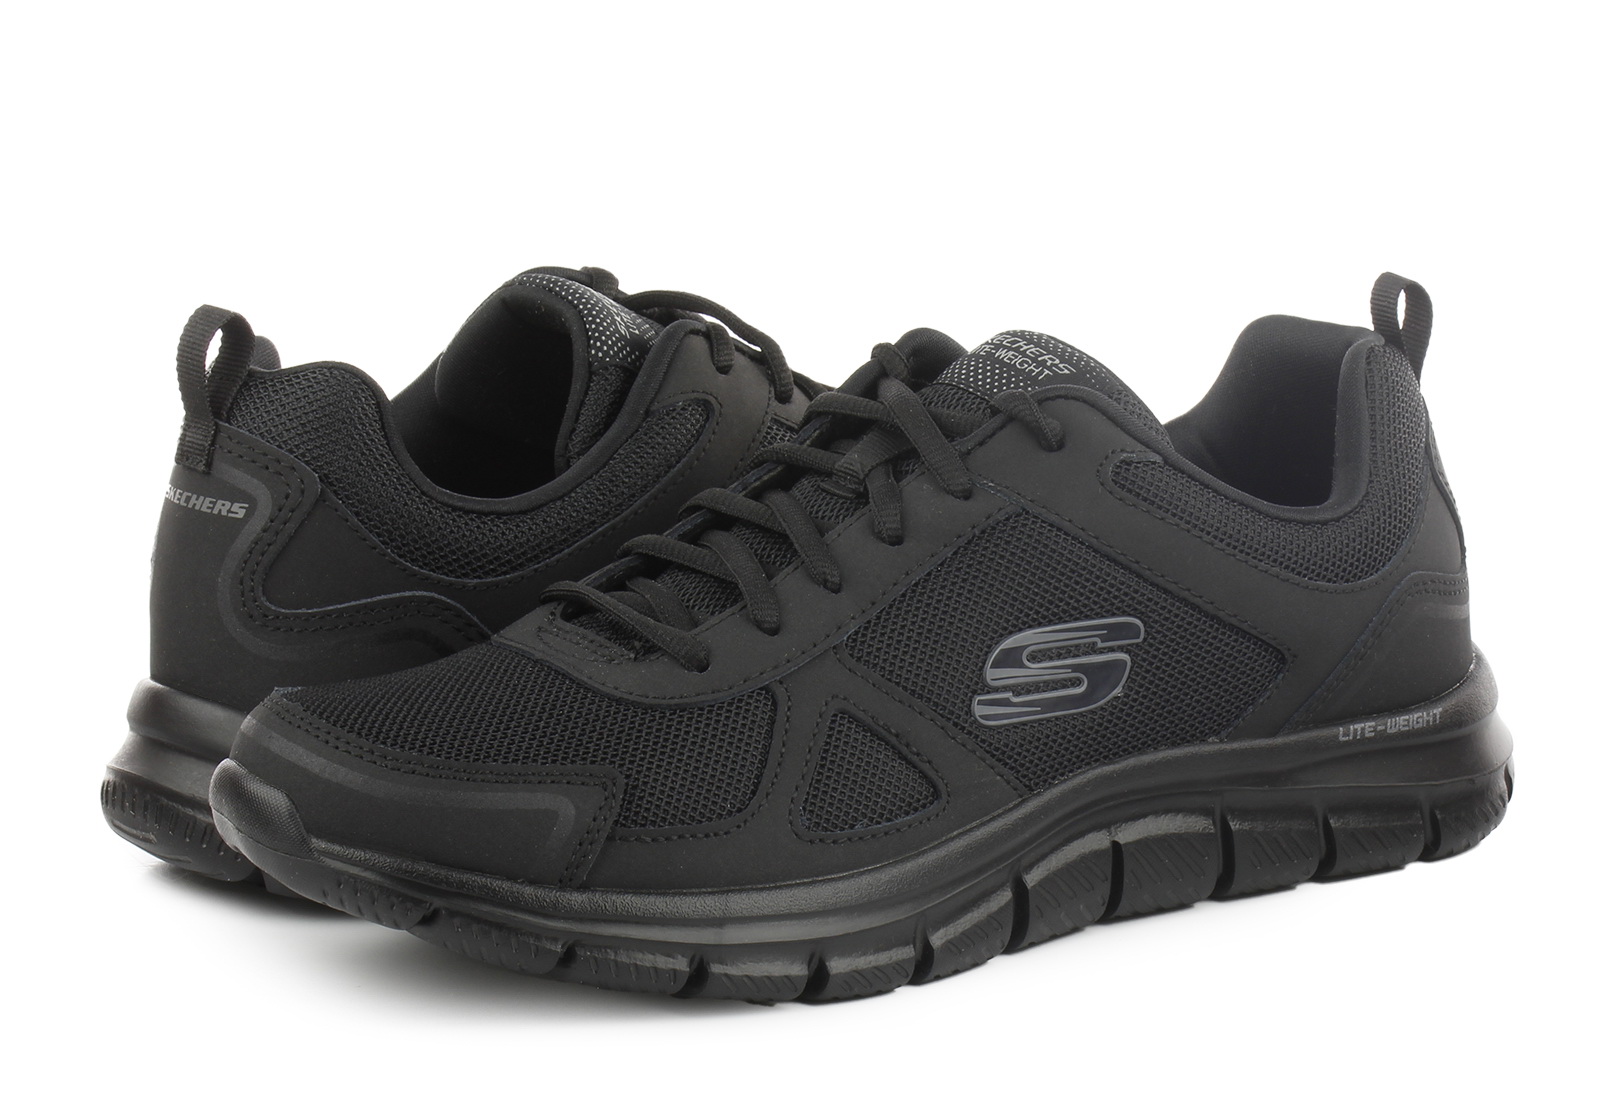 Destino Túnica comprador Skechers Sneakers - Track- Scloric - 52631-bbk - Online shop for sneakers,  shoes and boots